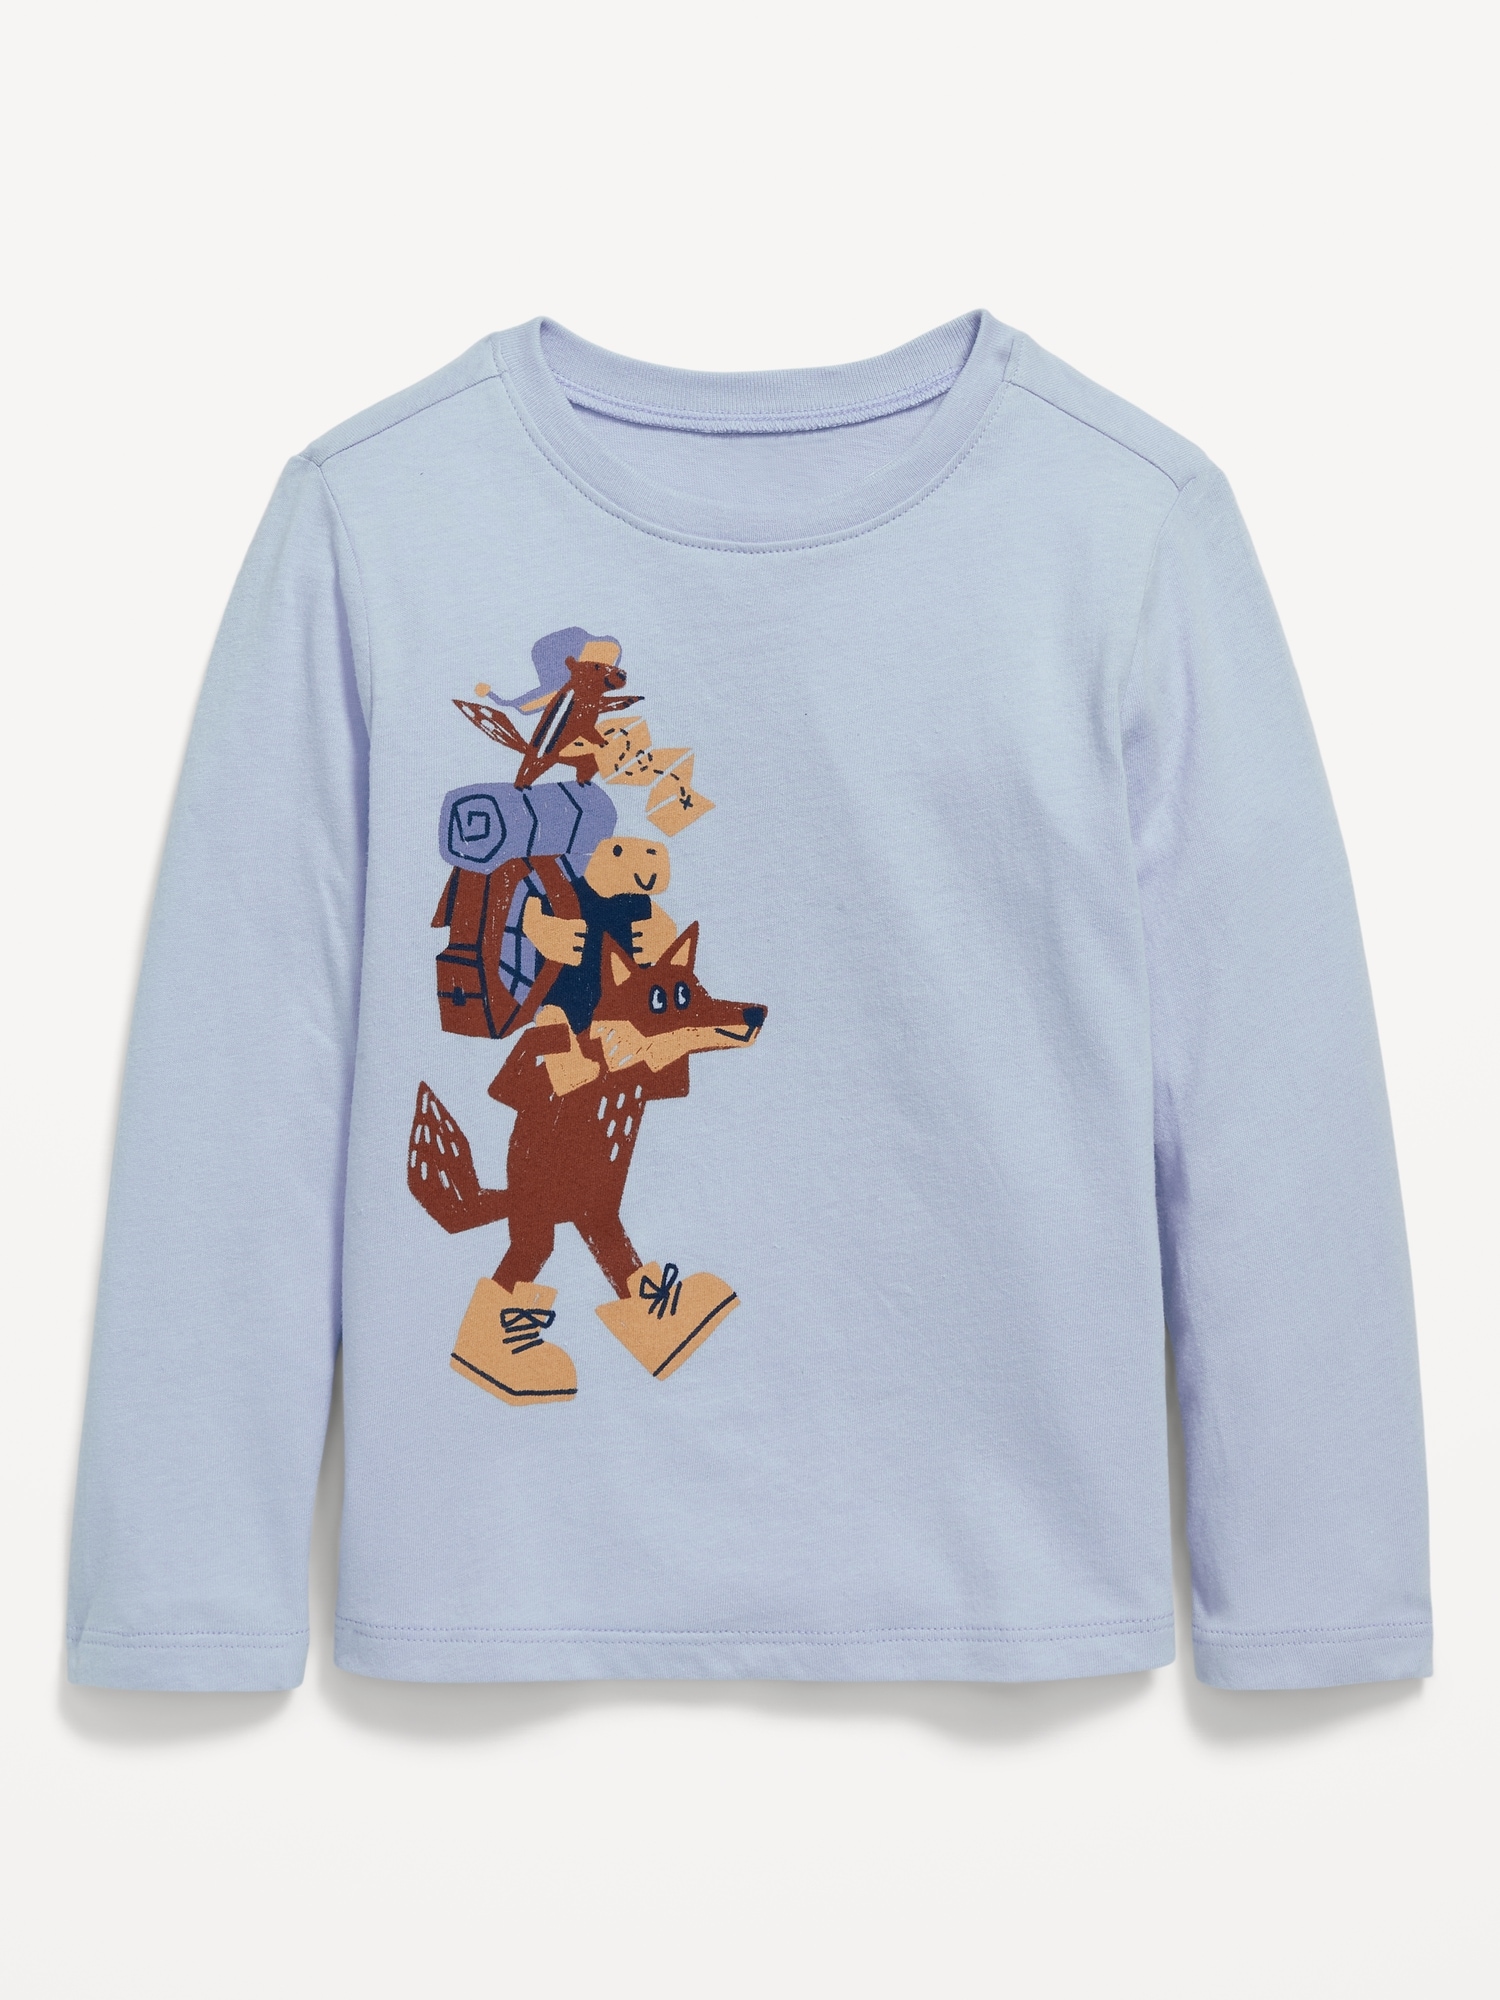 Unisex Long-Sleeve Graphic T-Shirt for Toddler